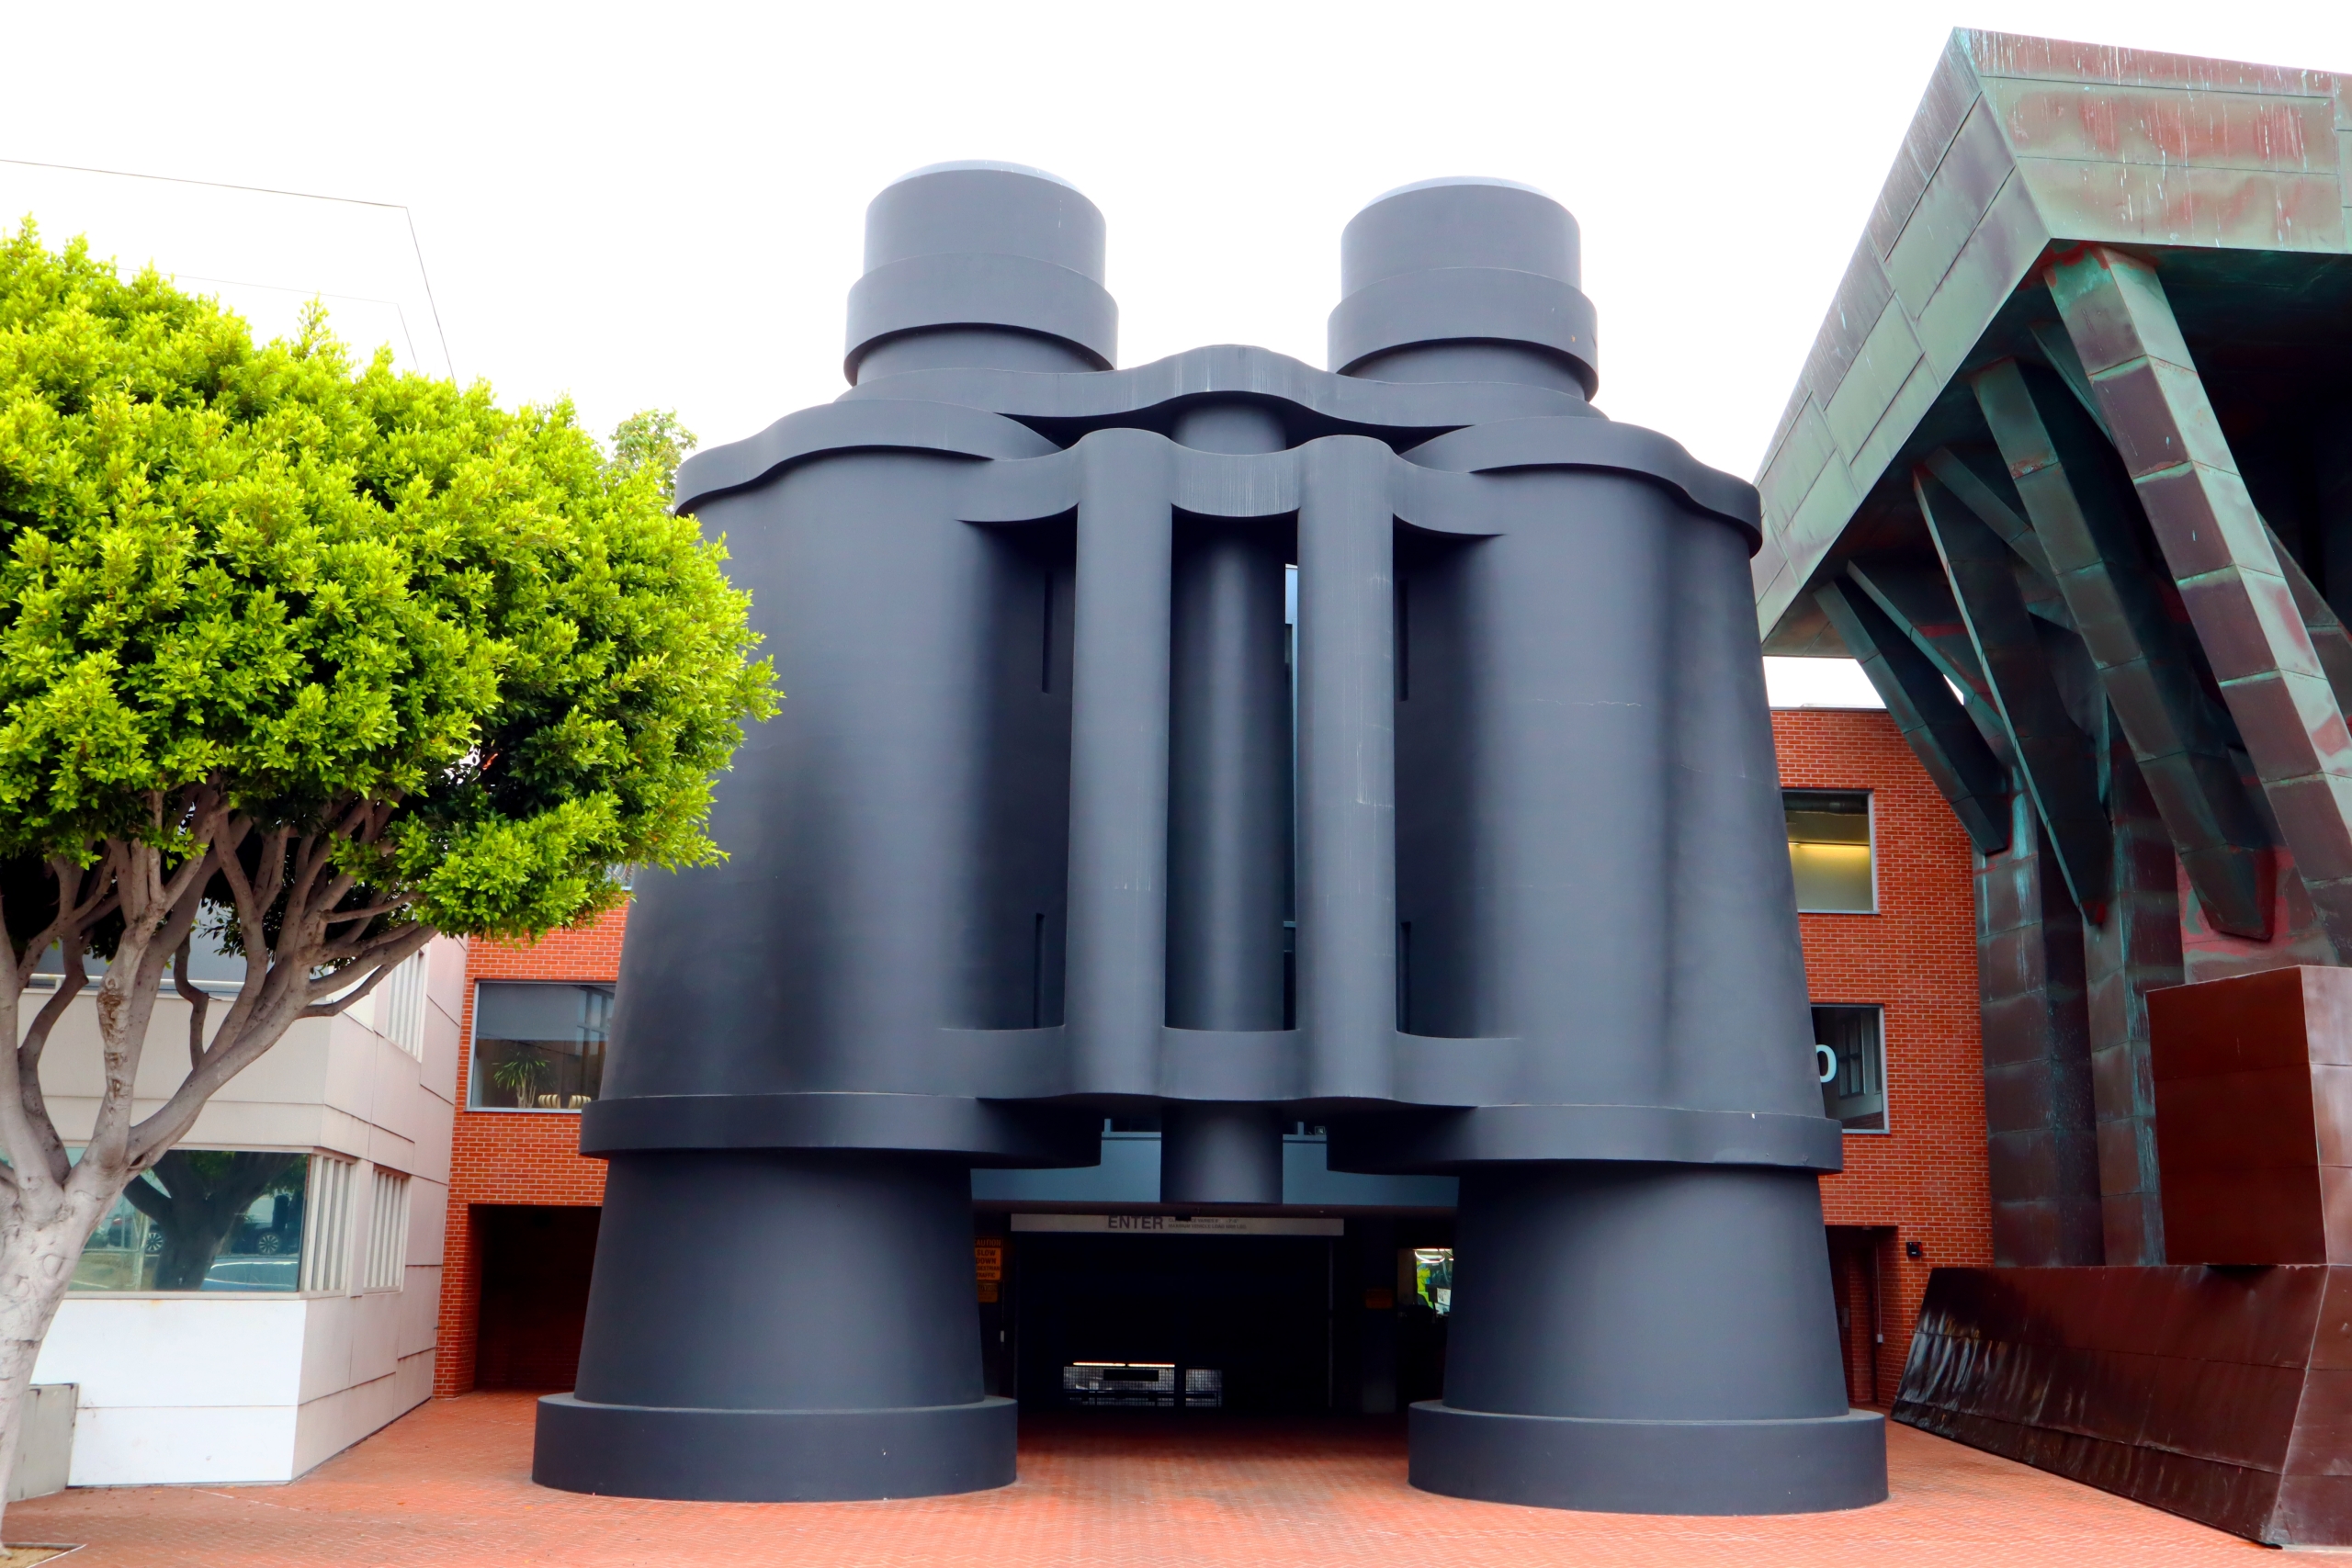 Huge pair of binoculars showcasing the entrance to the Chiat-Day building